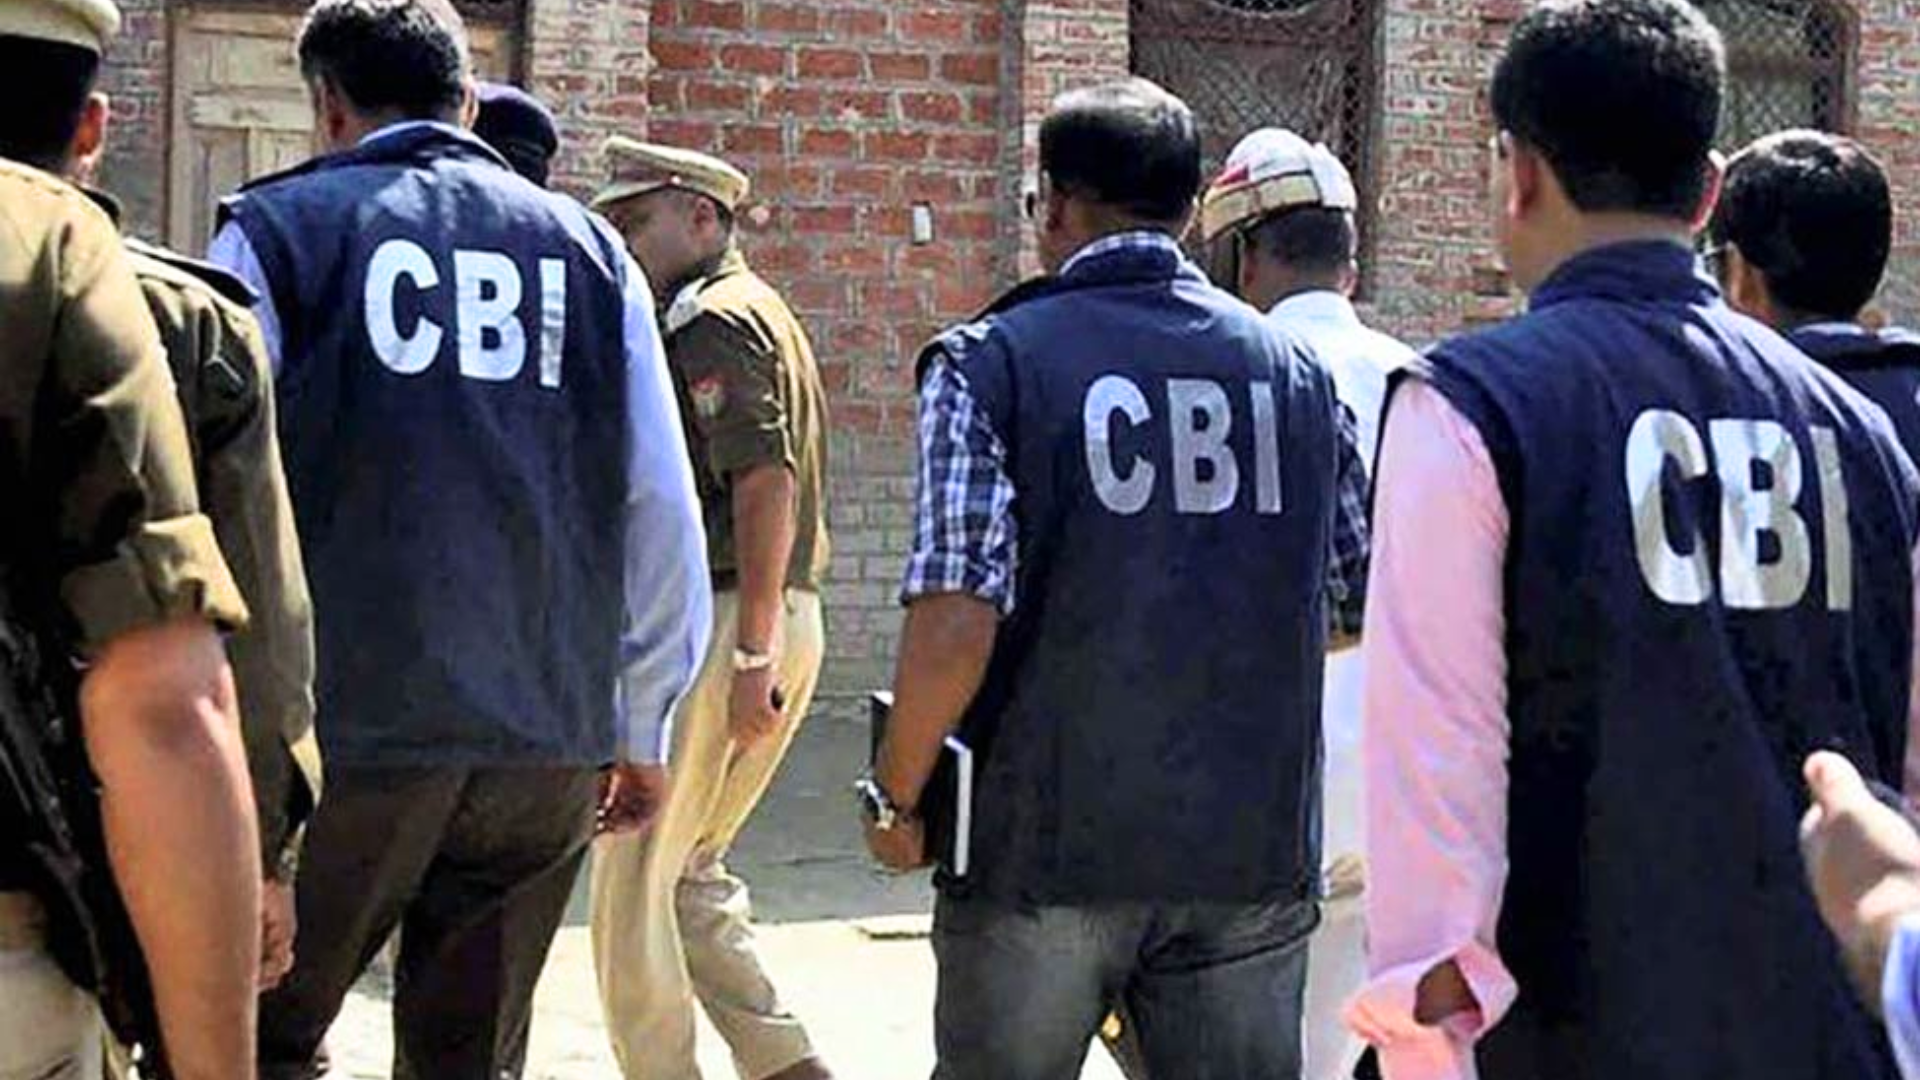 CBI Busts Child Trafficking Racket After Raiding Multiple Locations, Newborns Were Sold For 4-6 Lakhs